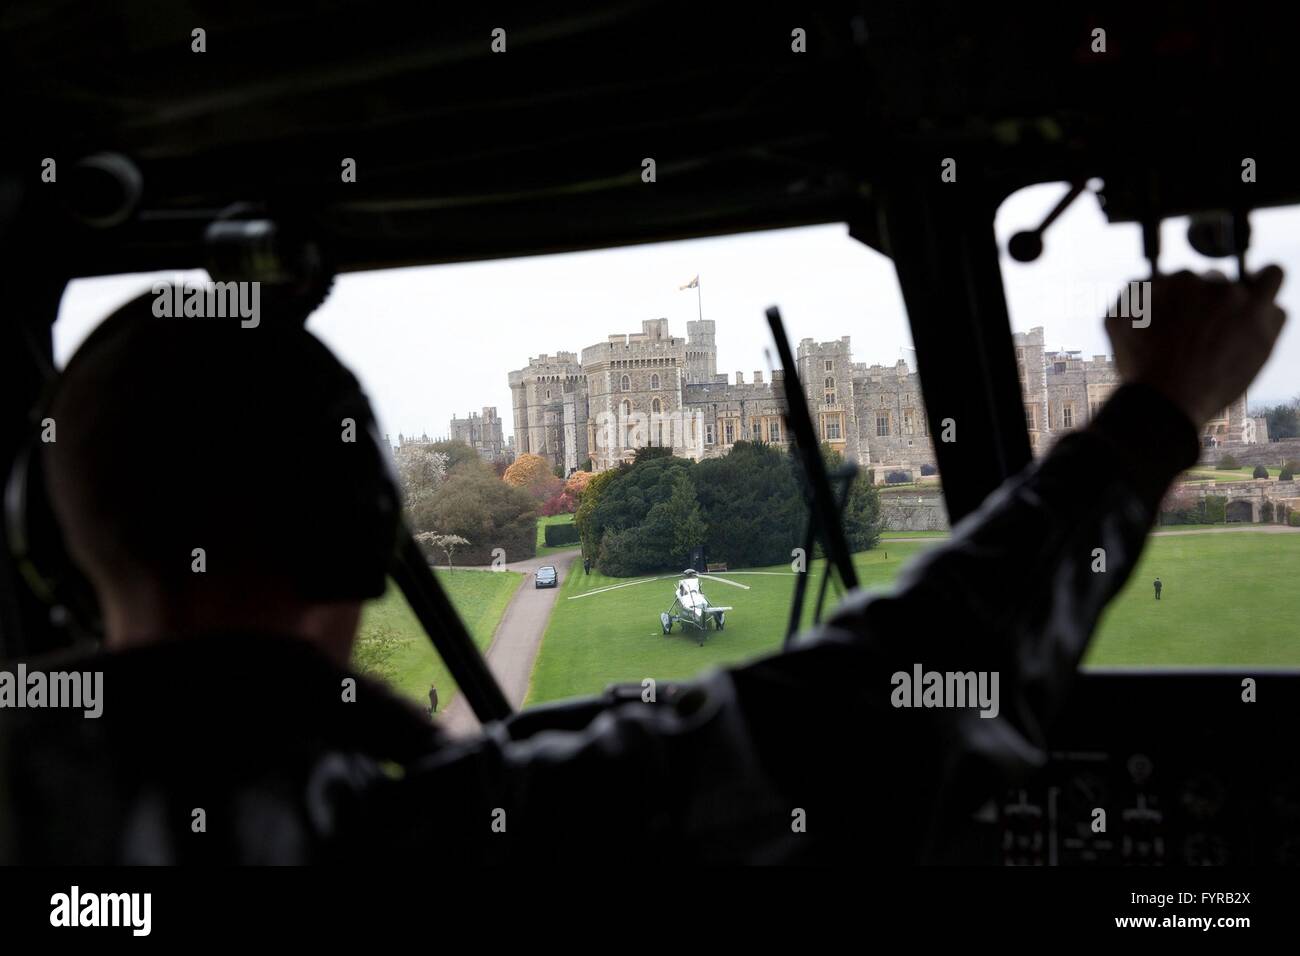 View from the cockpit of Windsor Castle as Marine One helicopter carrying U.S President Barack Obama approaches to land April 22, 2016 in Windsor, United Kingdom. Stock Photo